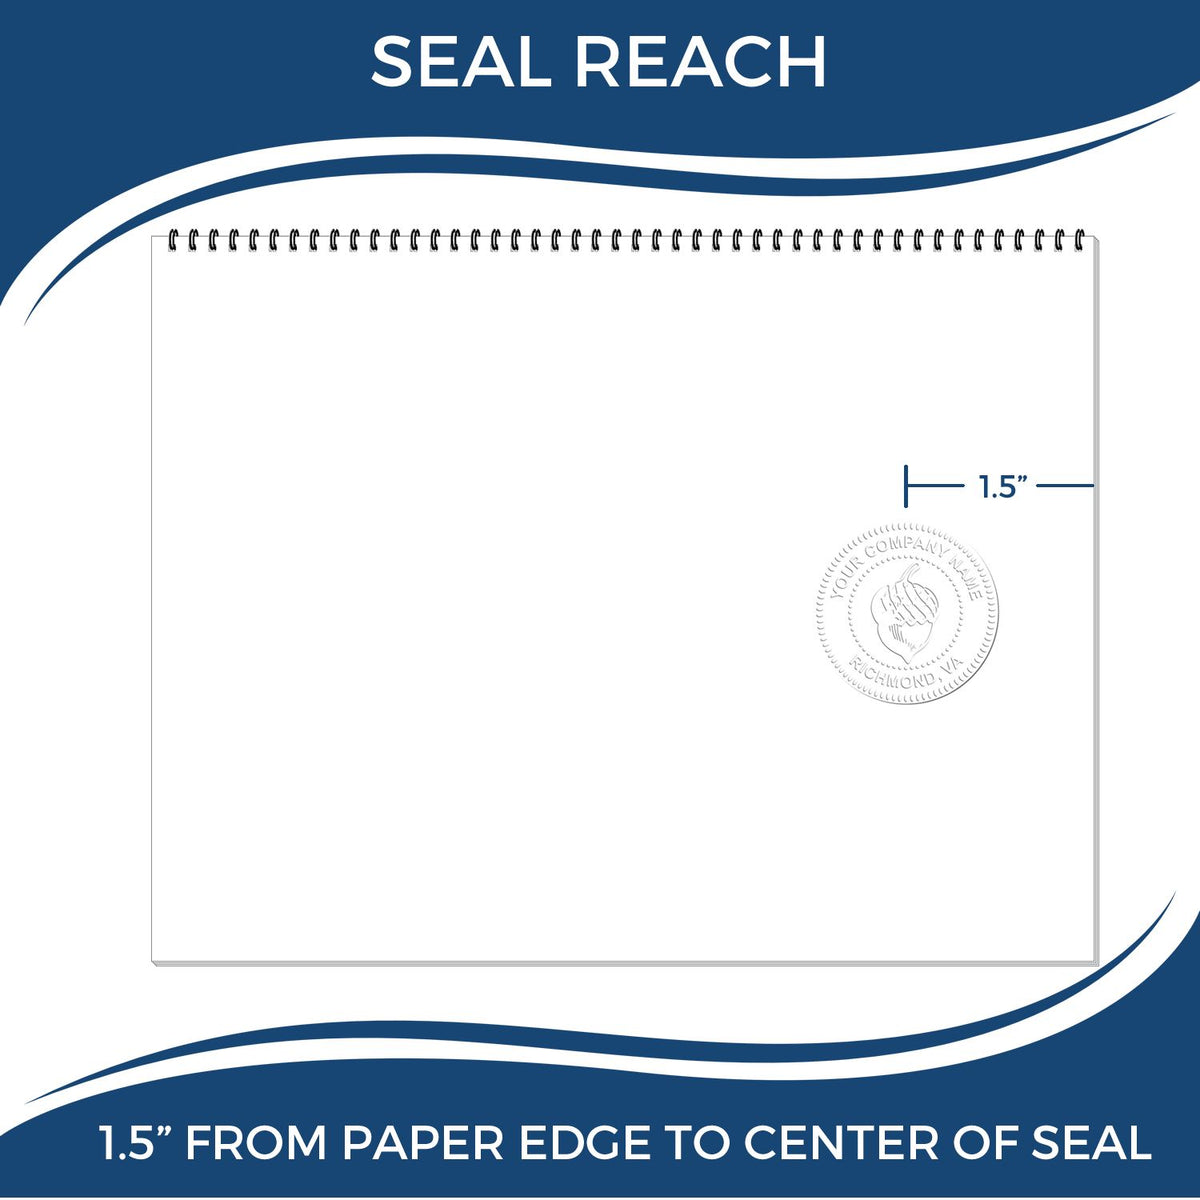 An infographic showing the seal reach which is represented by a ruler and a miniature seal image of the Hawaii Desk Architect Embossing Seal